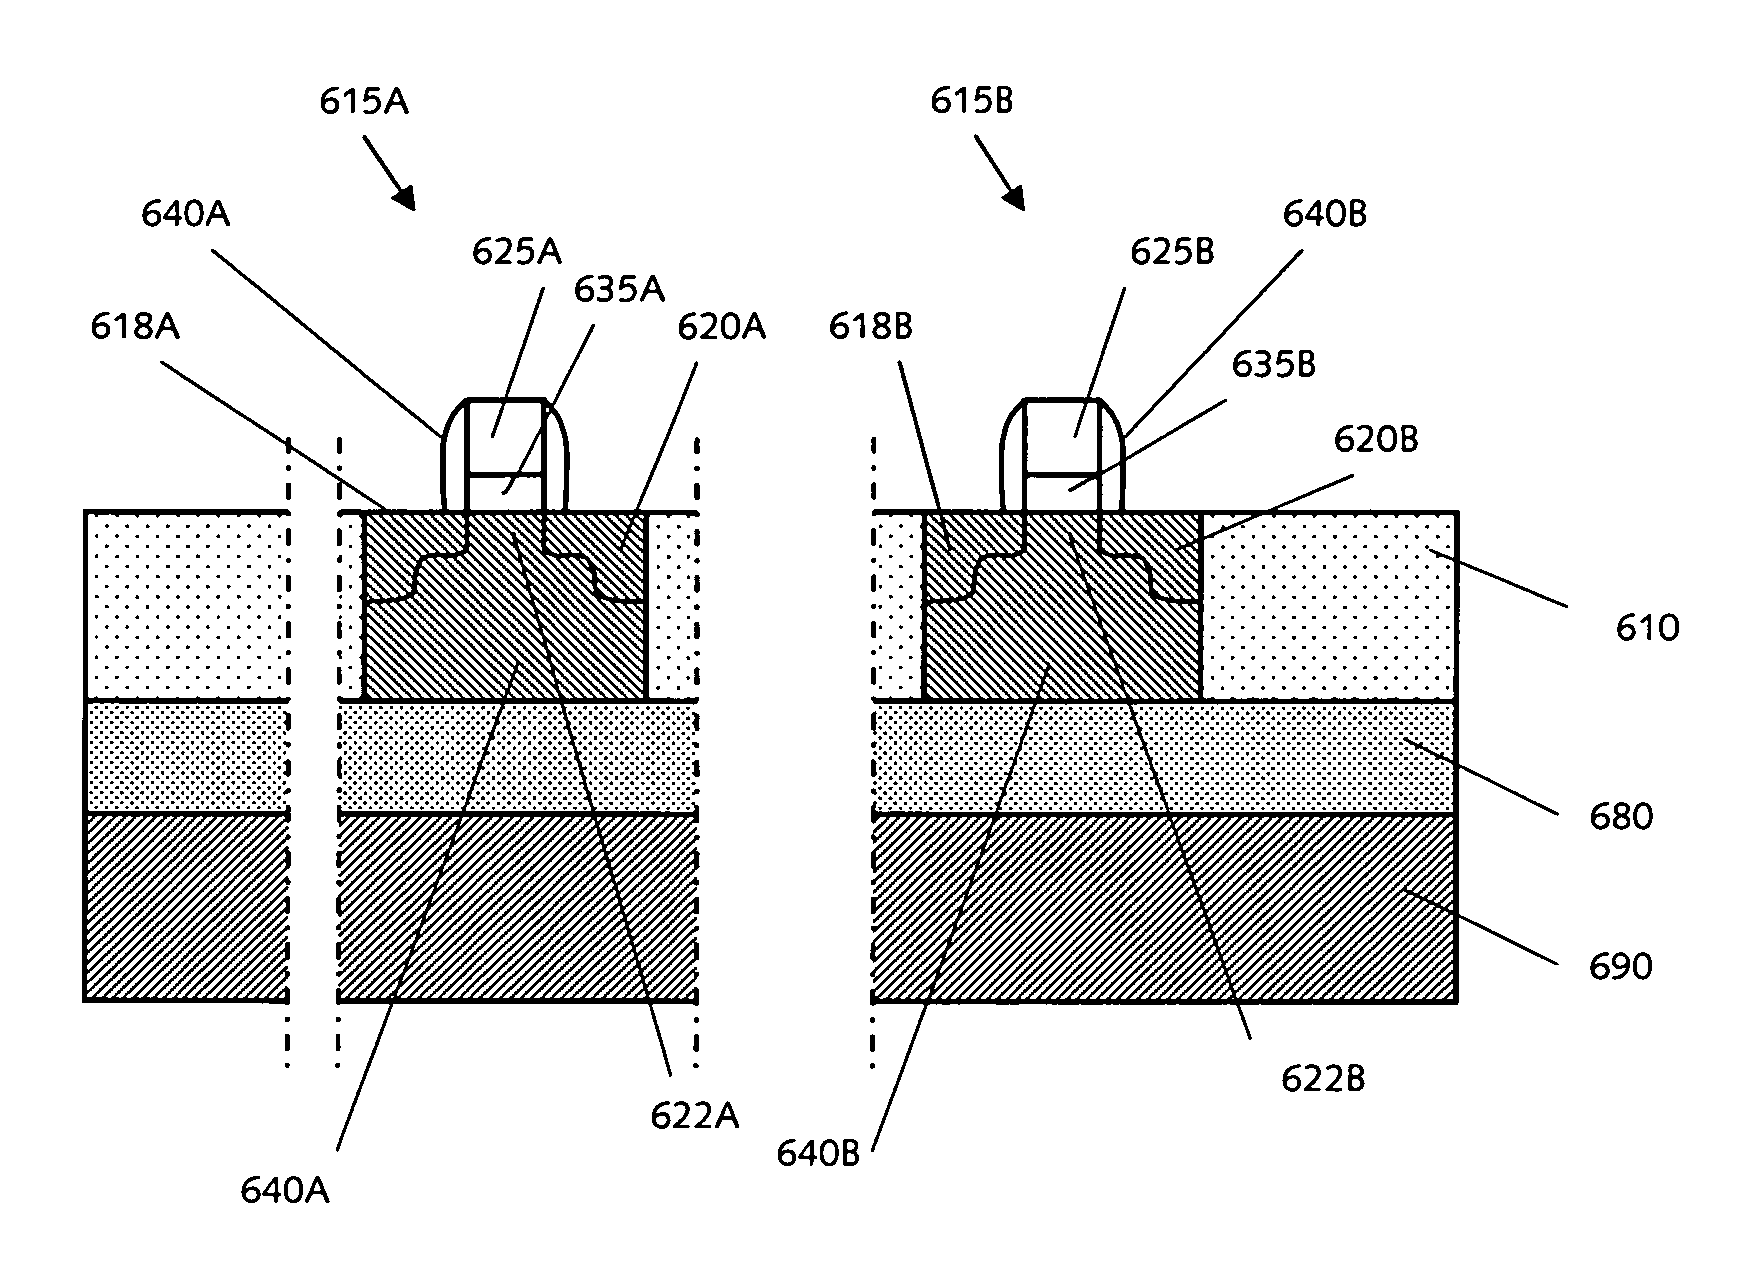 Lattice-mismatched semiconductor structures on insulators